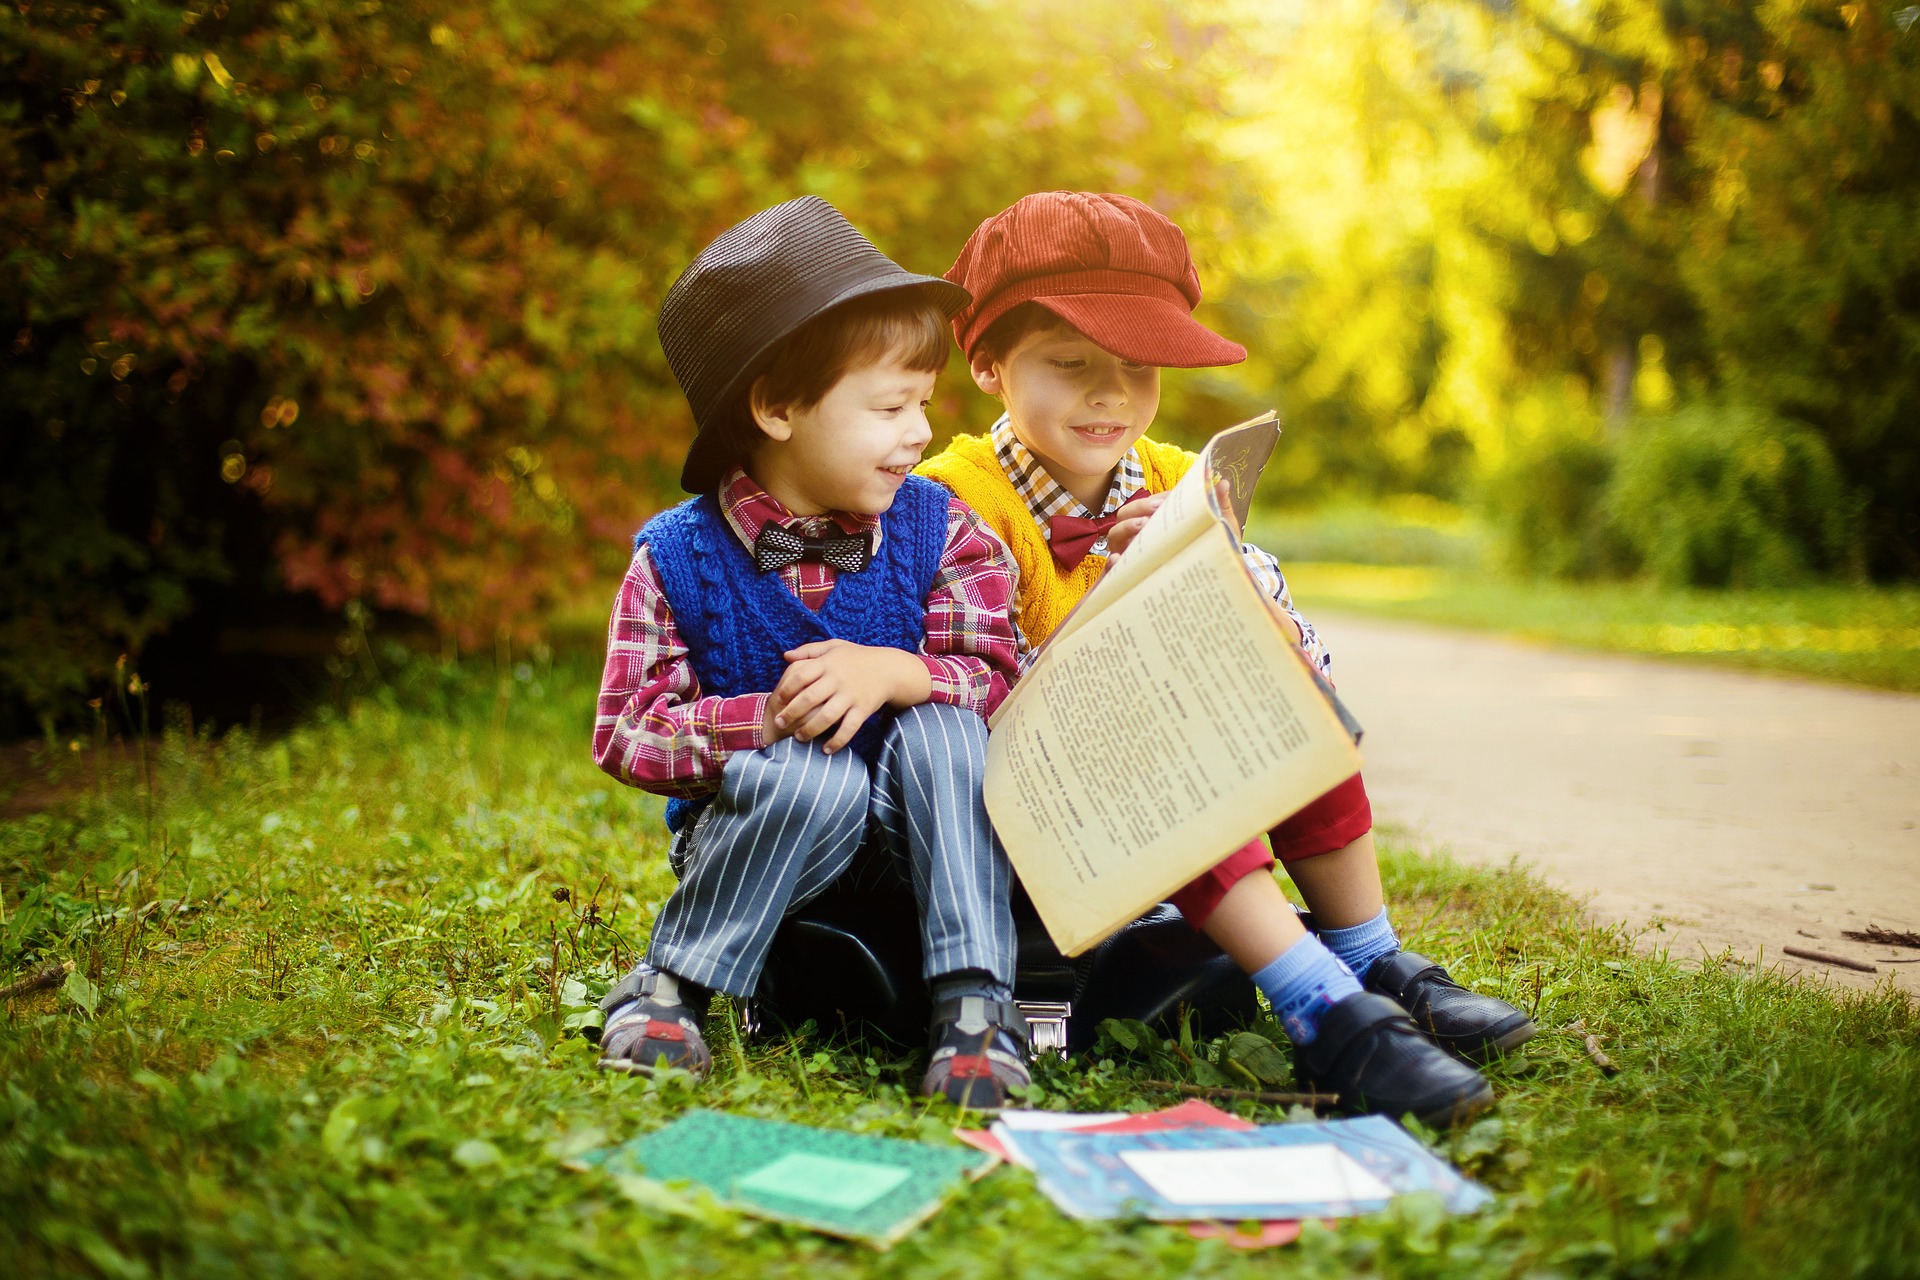 Two young boys sitting outside in early autumn looking at and reading a book